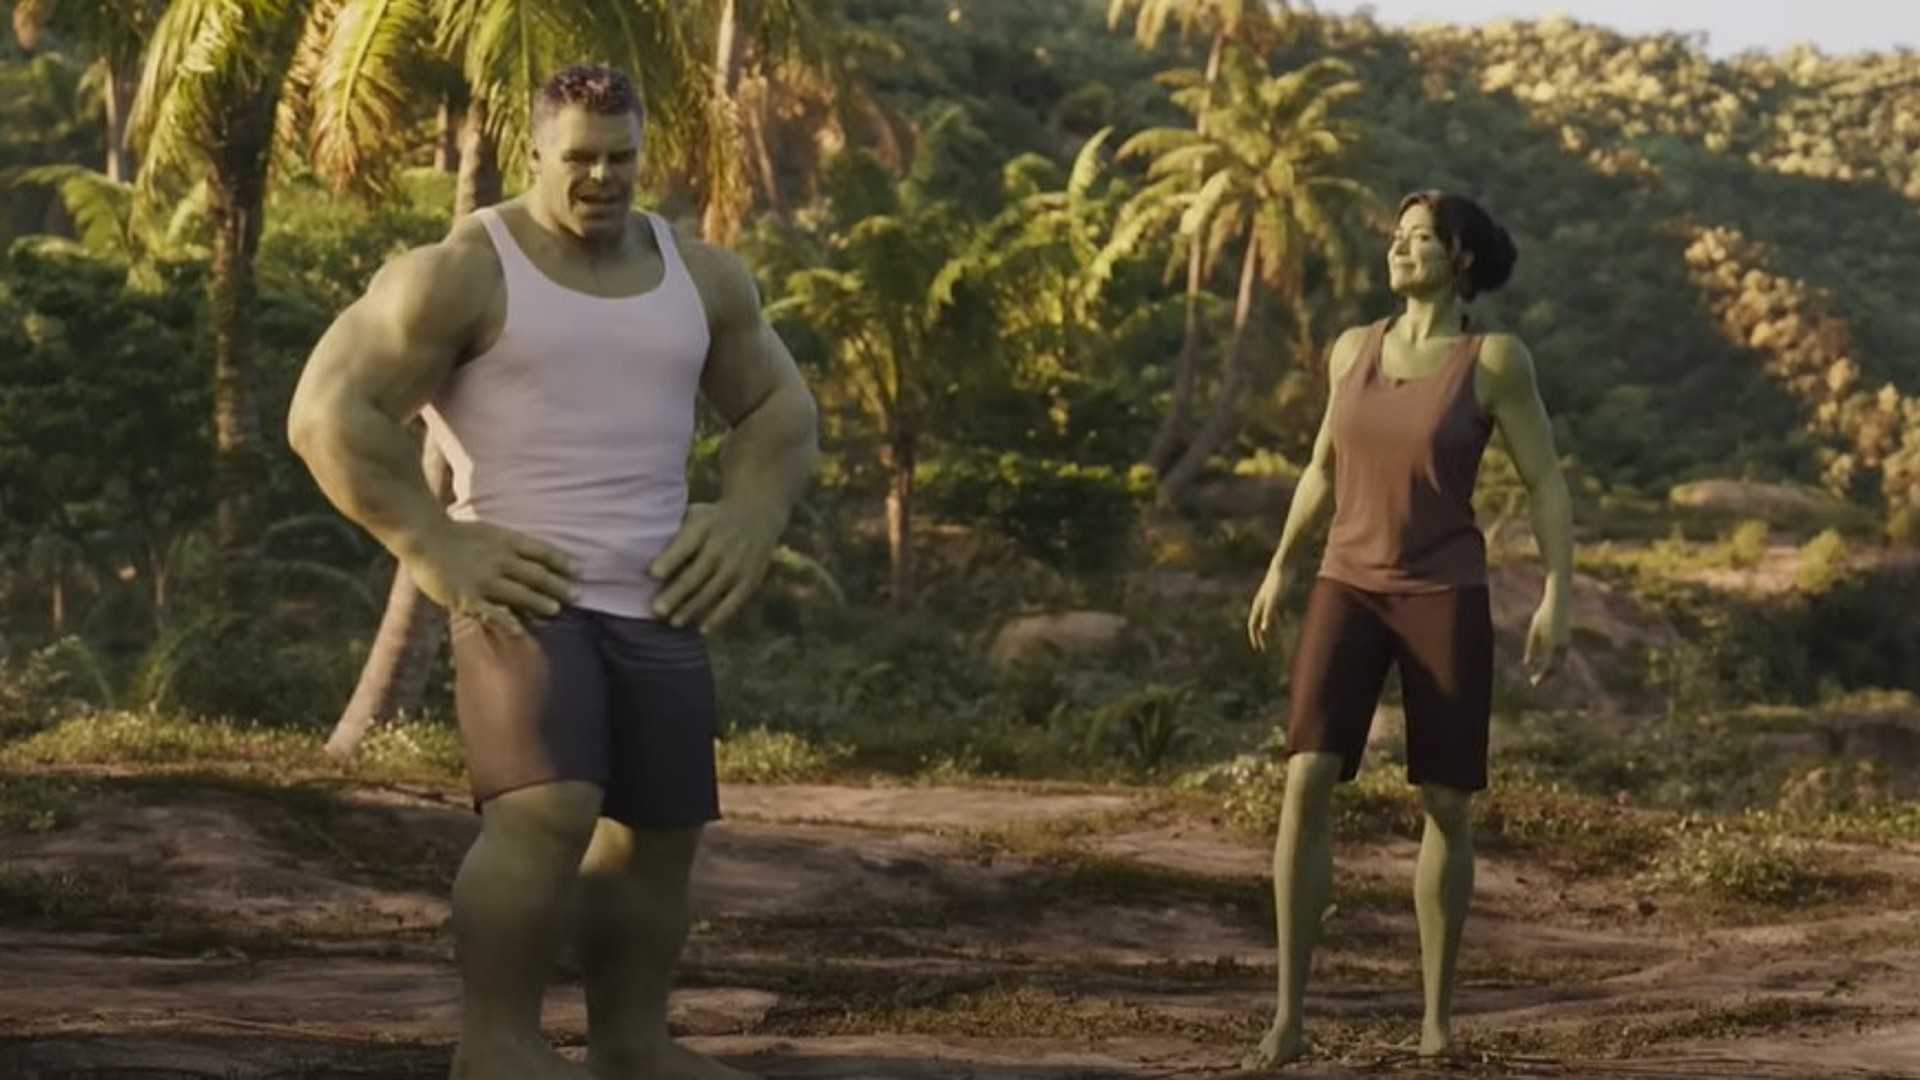 She-Hulk faces off against Jameela Jamil's Titania in this new clip from the show